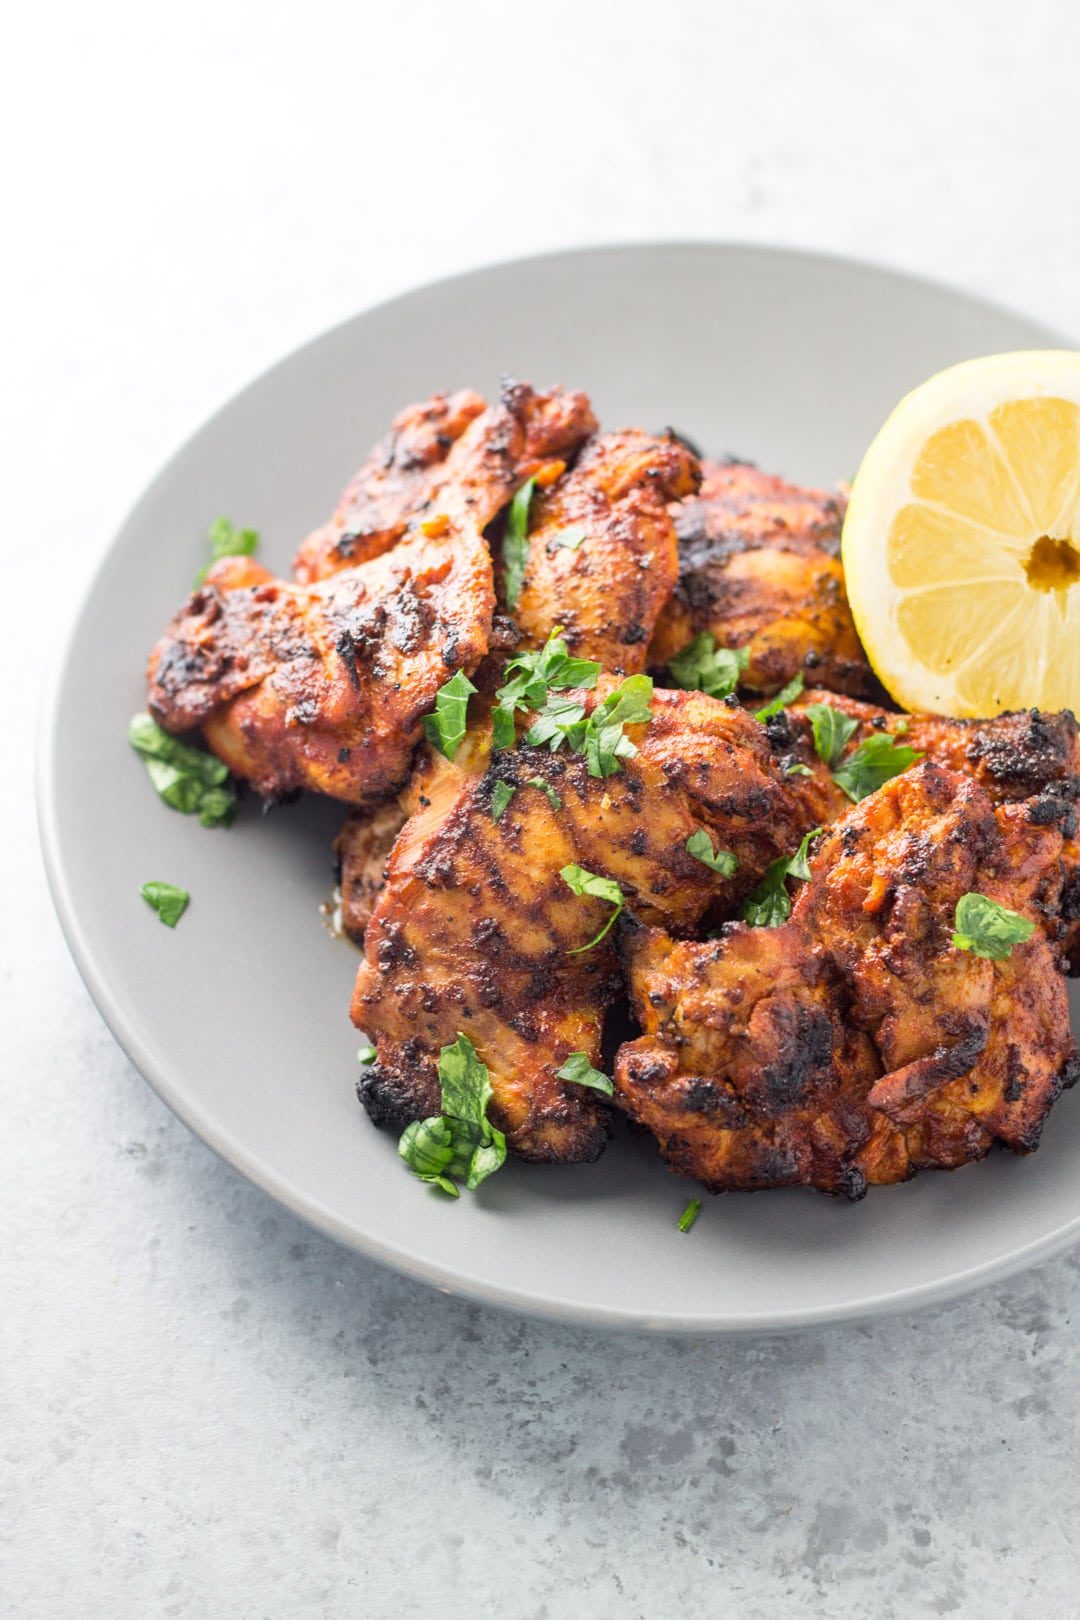 A plate of peri peri grilled chicken thighs with a lemon half.